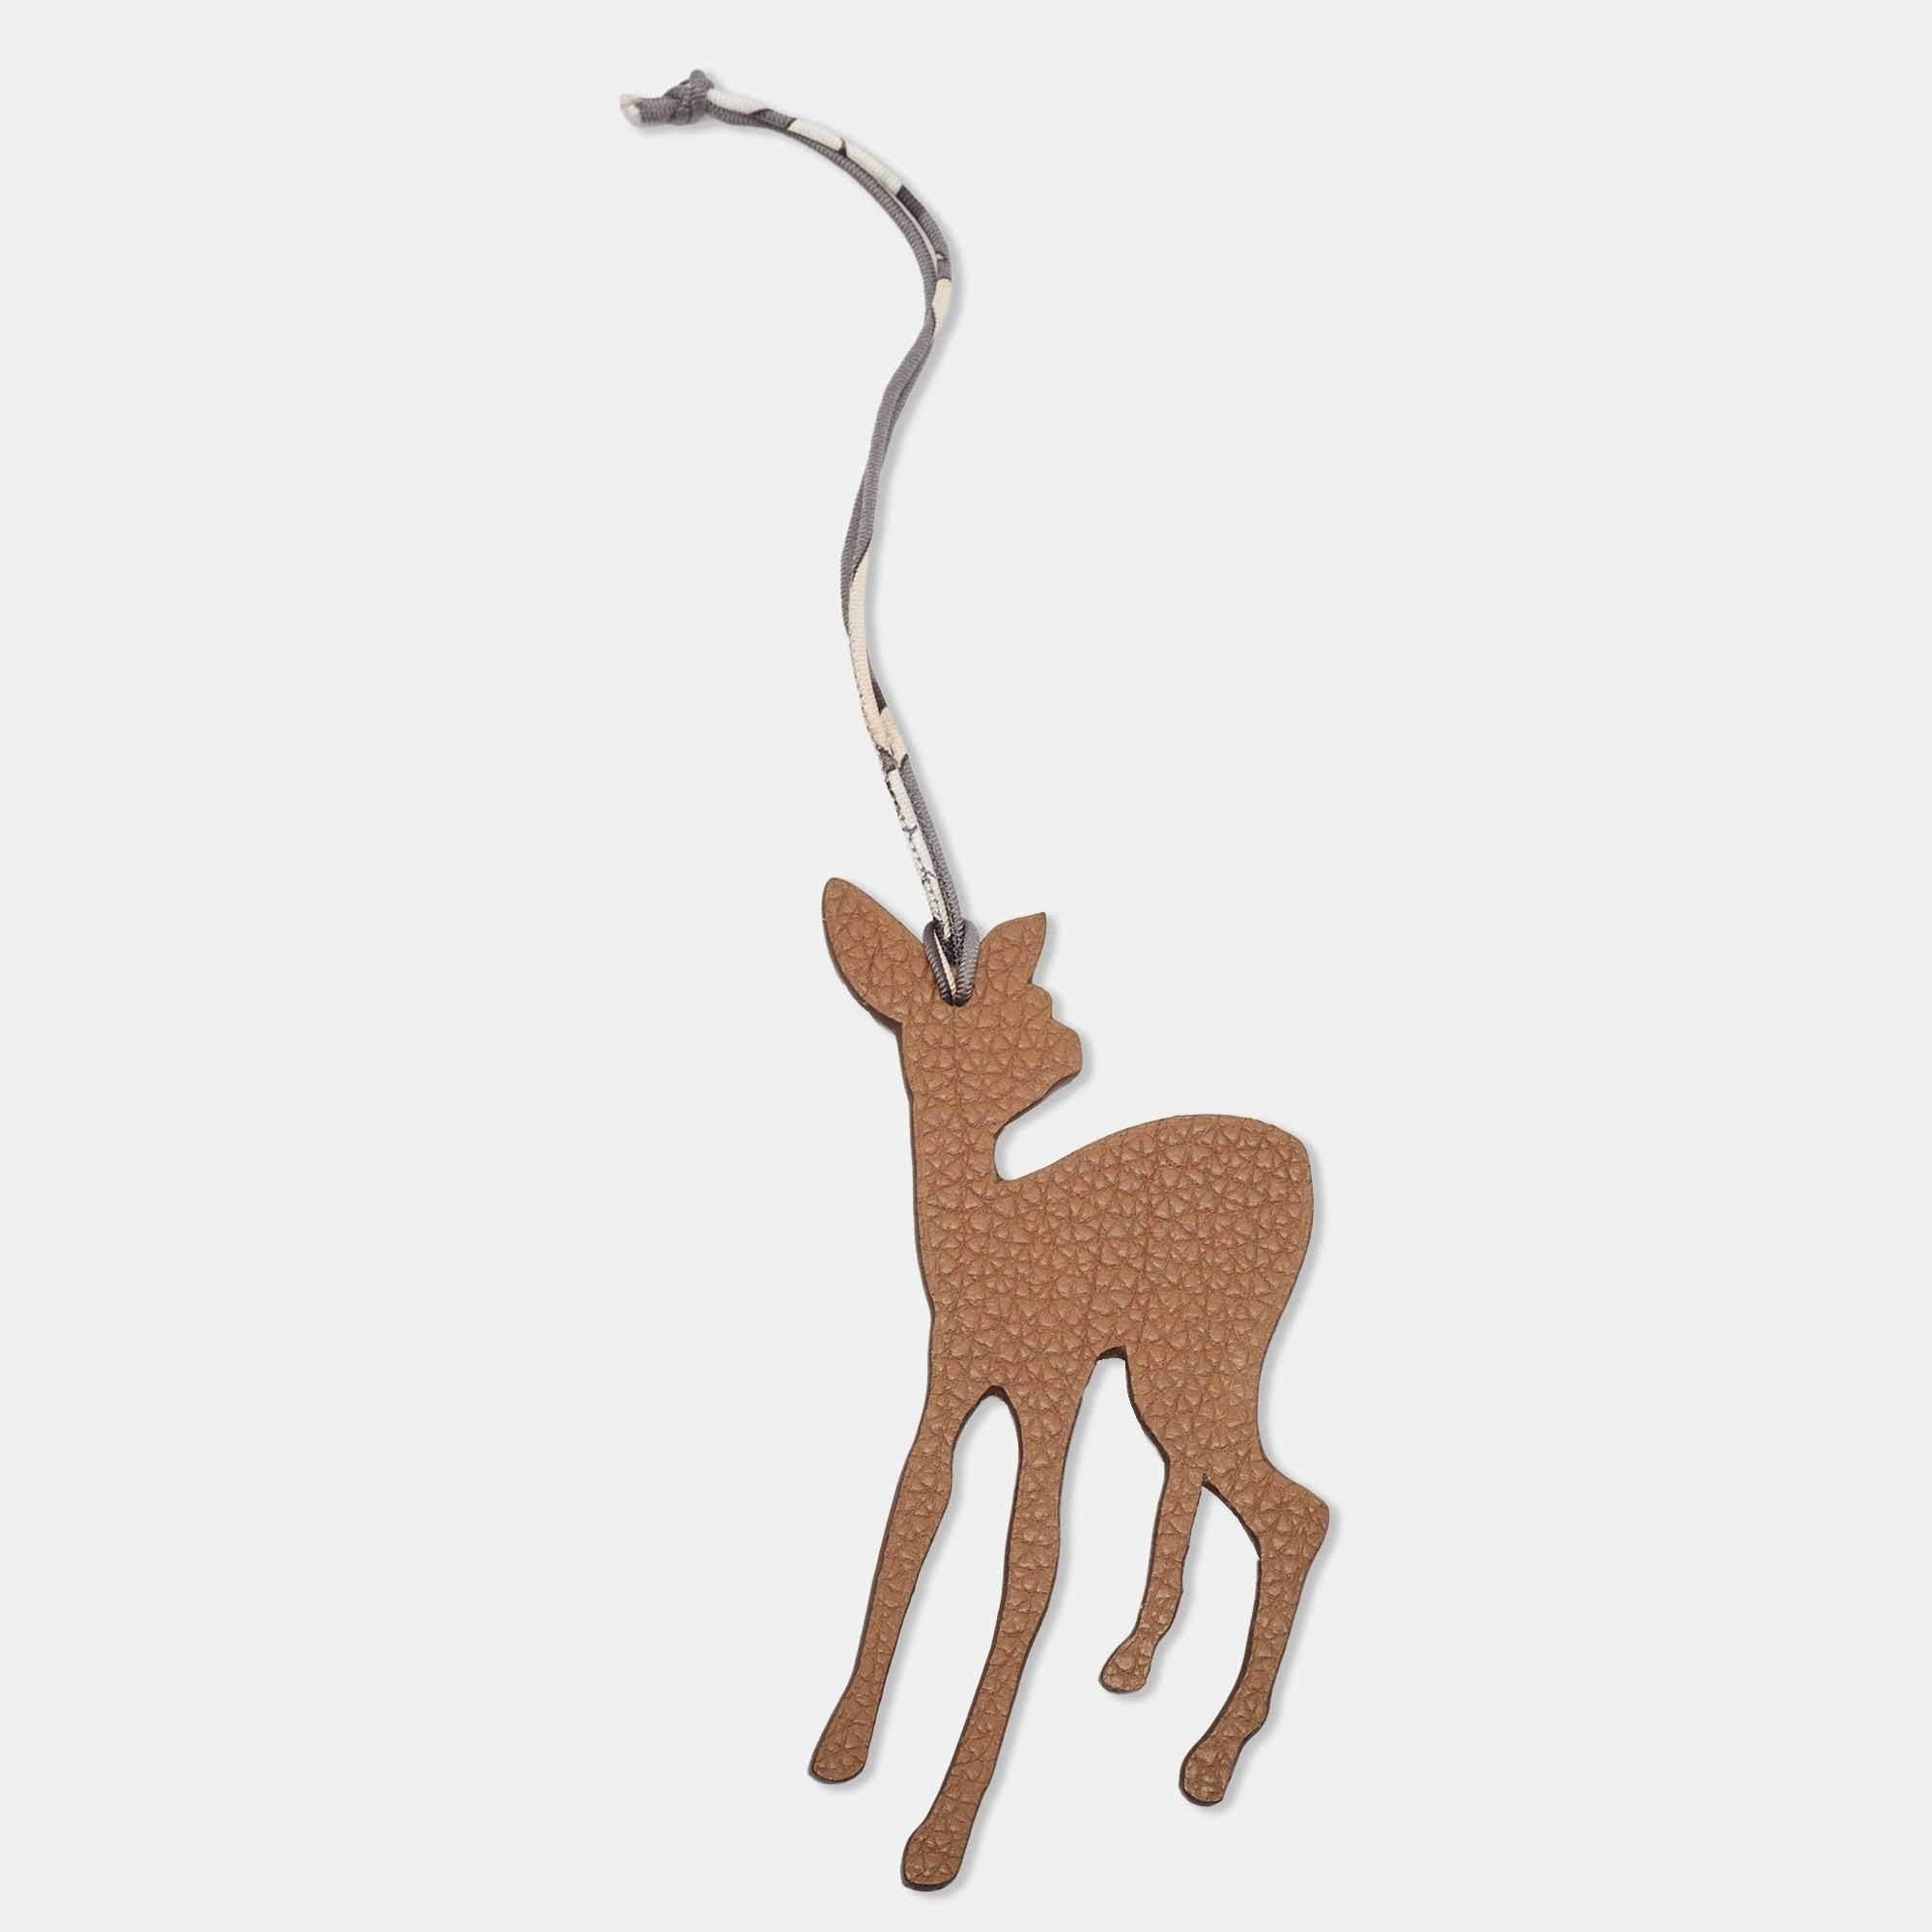 The Hermès bag charm features a petite H deer design crafted from both Epsom and Togo leathers, showcasing a harmonious blend of two hues. Its exquisite craftsmanship and playful charm make it a luxurious accessory.

